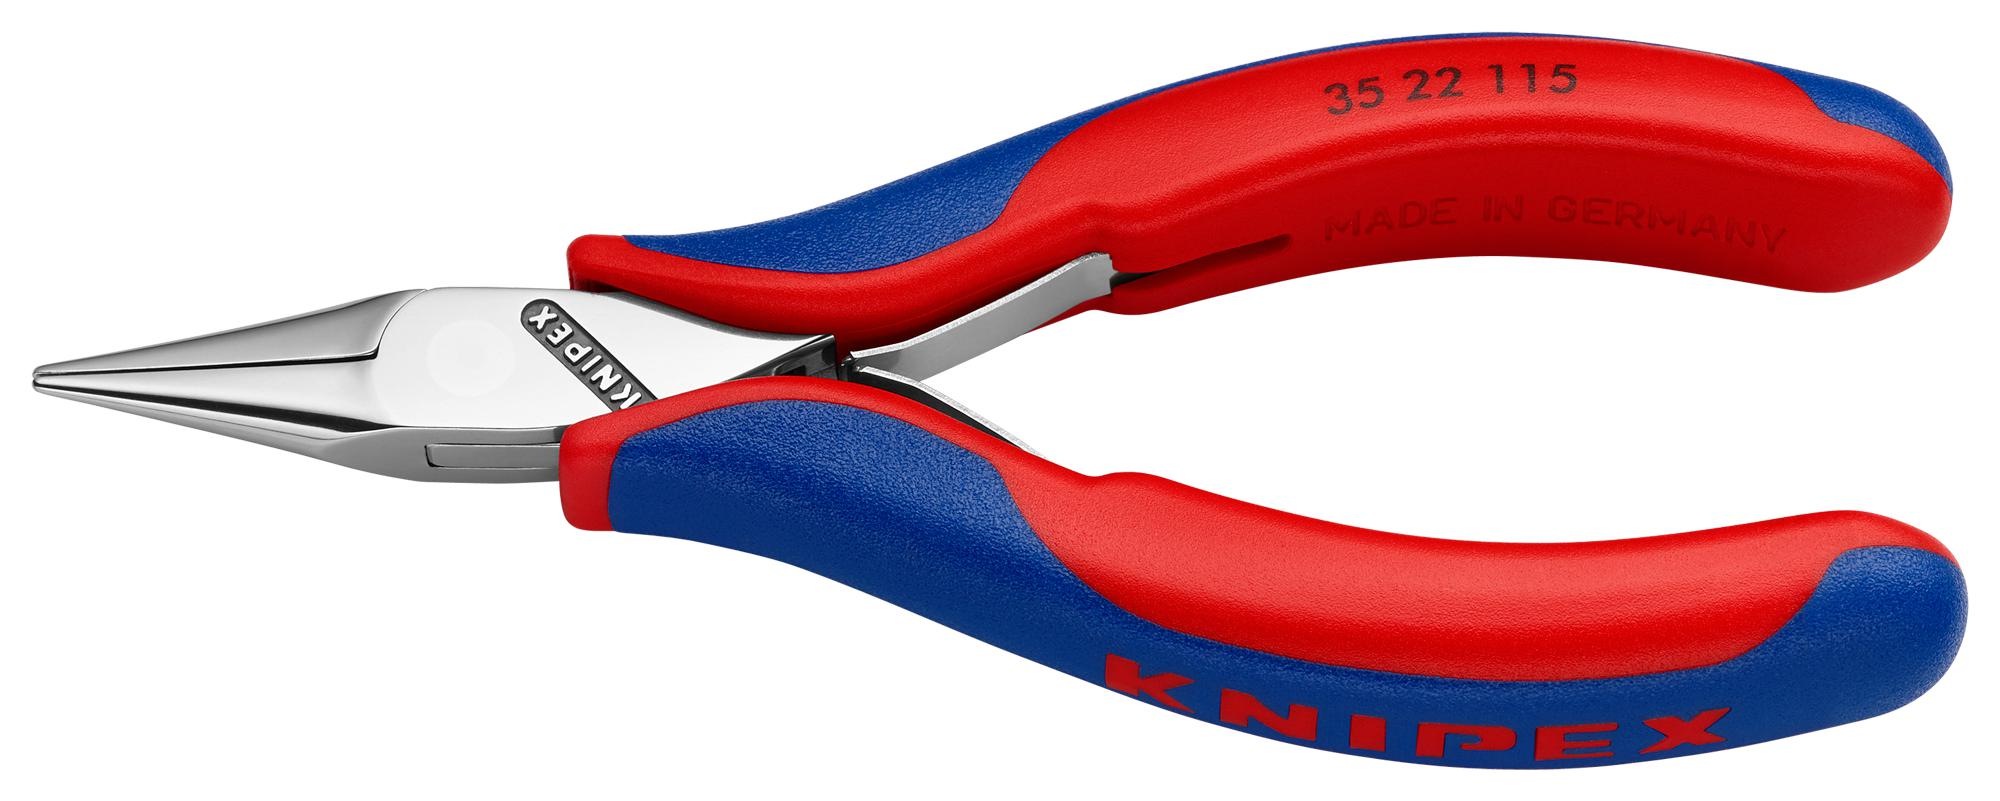 35 22 115 RELAY ADJUSTING PLIERS KNIPEX